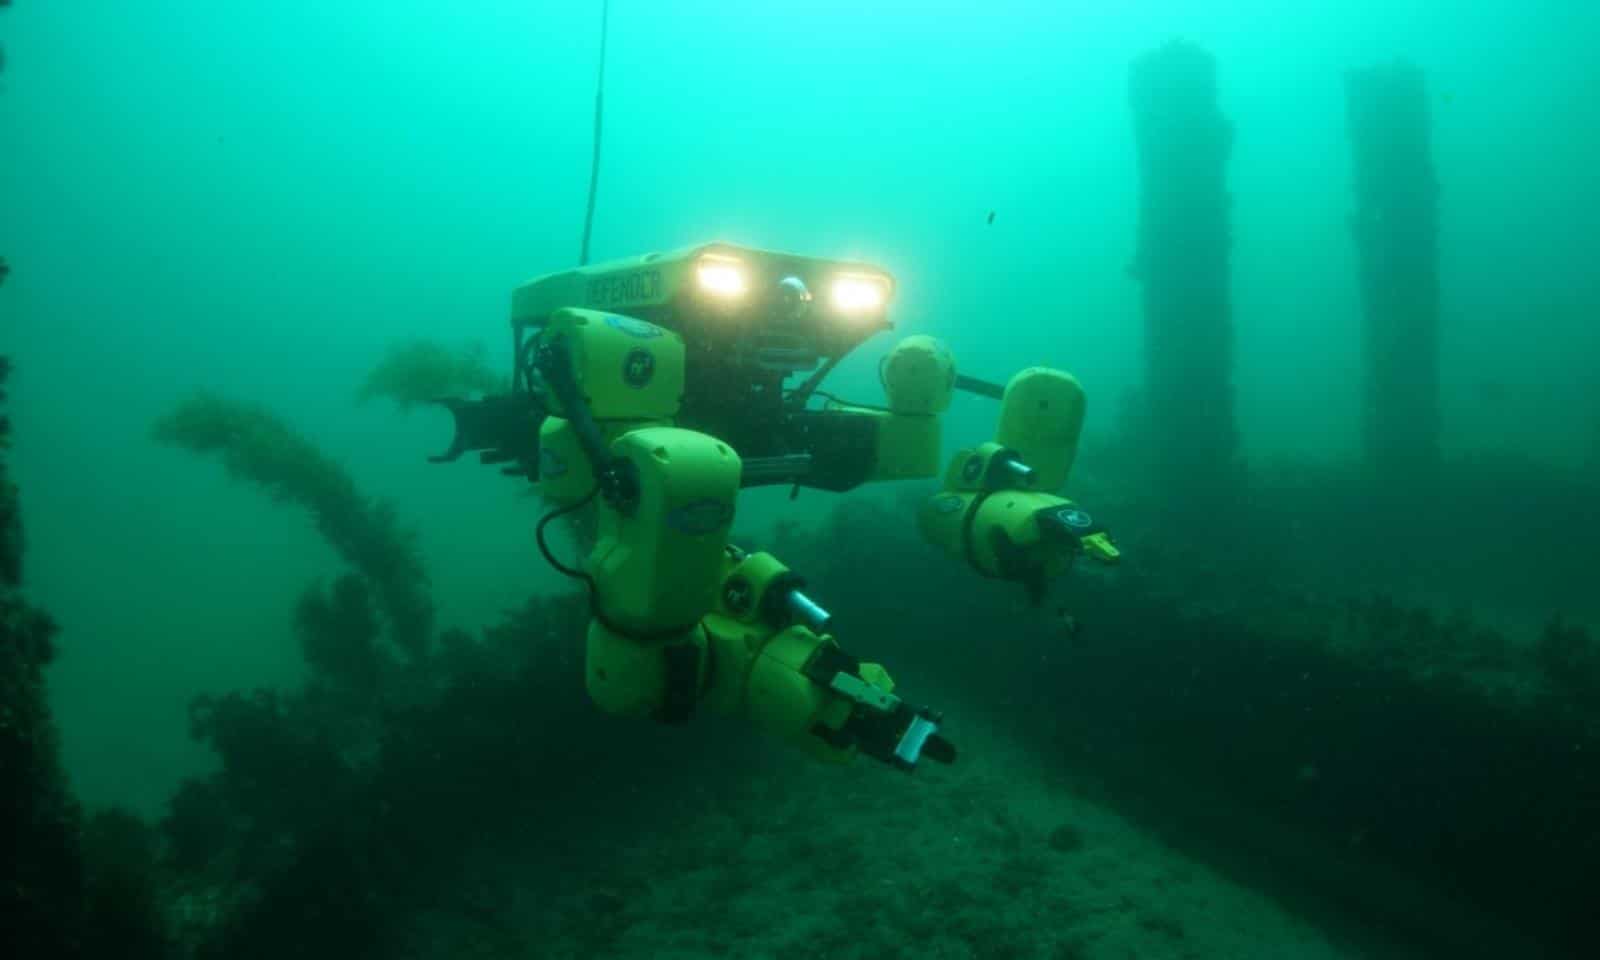 The M2NS robot will use massive arms to neutralize sea mines